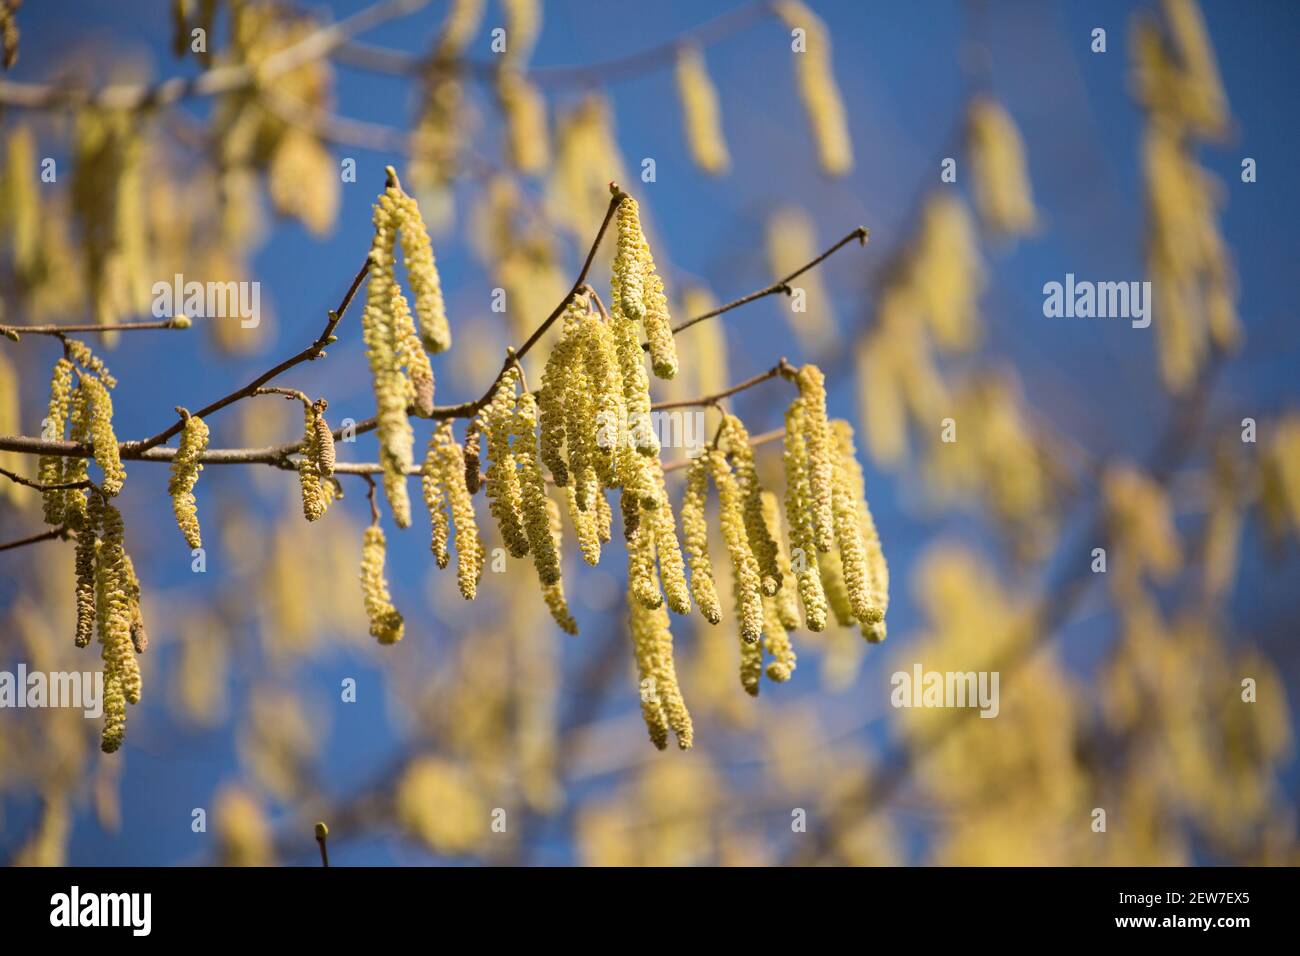 A hazel tree in February sunshine displaying yellow male catkins, also known as lambs tails. The much smaller female flowers grow on the same stems as Stock Photo